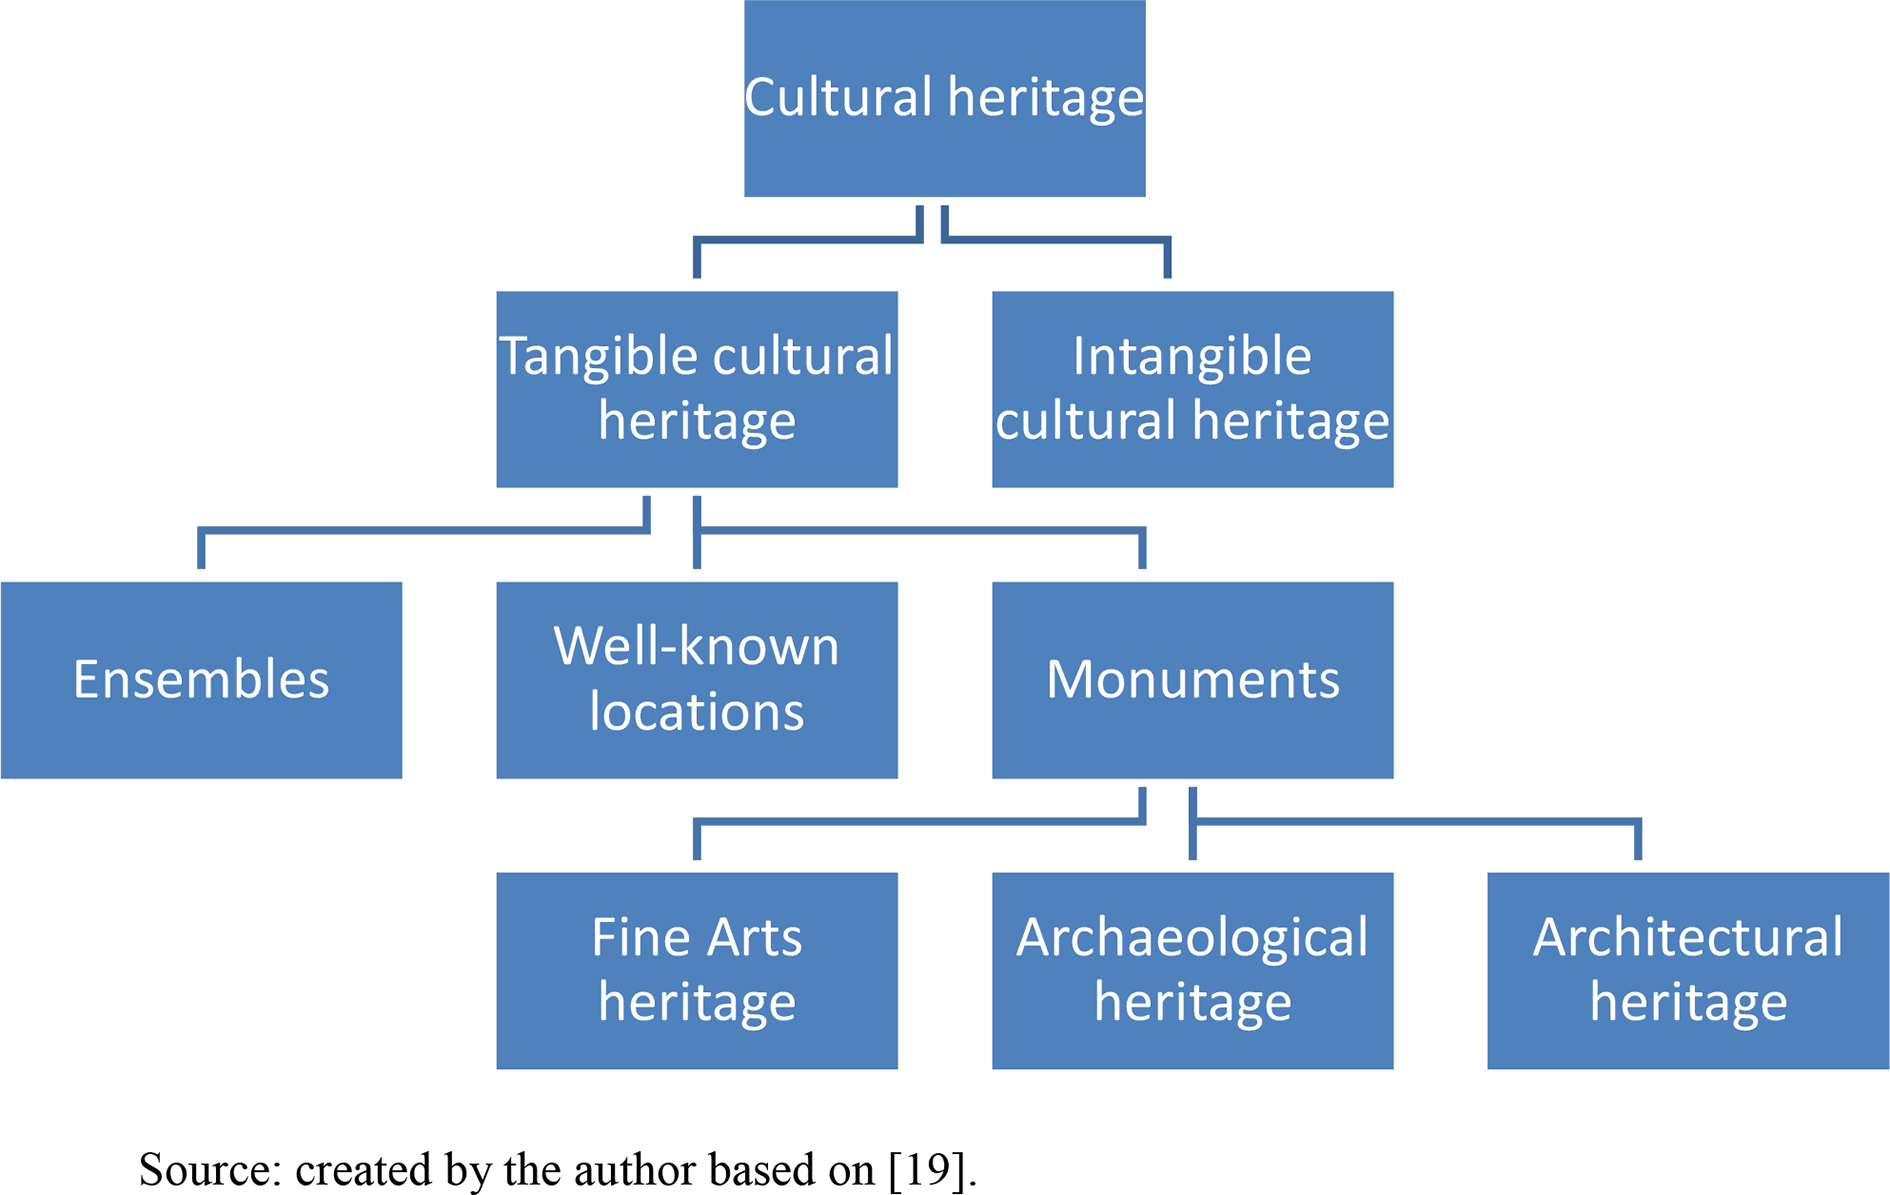 research on global cultural heritage tourism based on bibliometric analysis